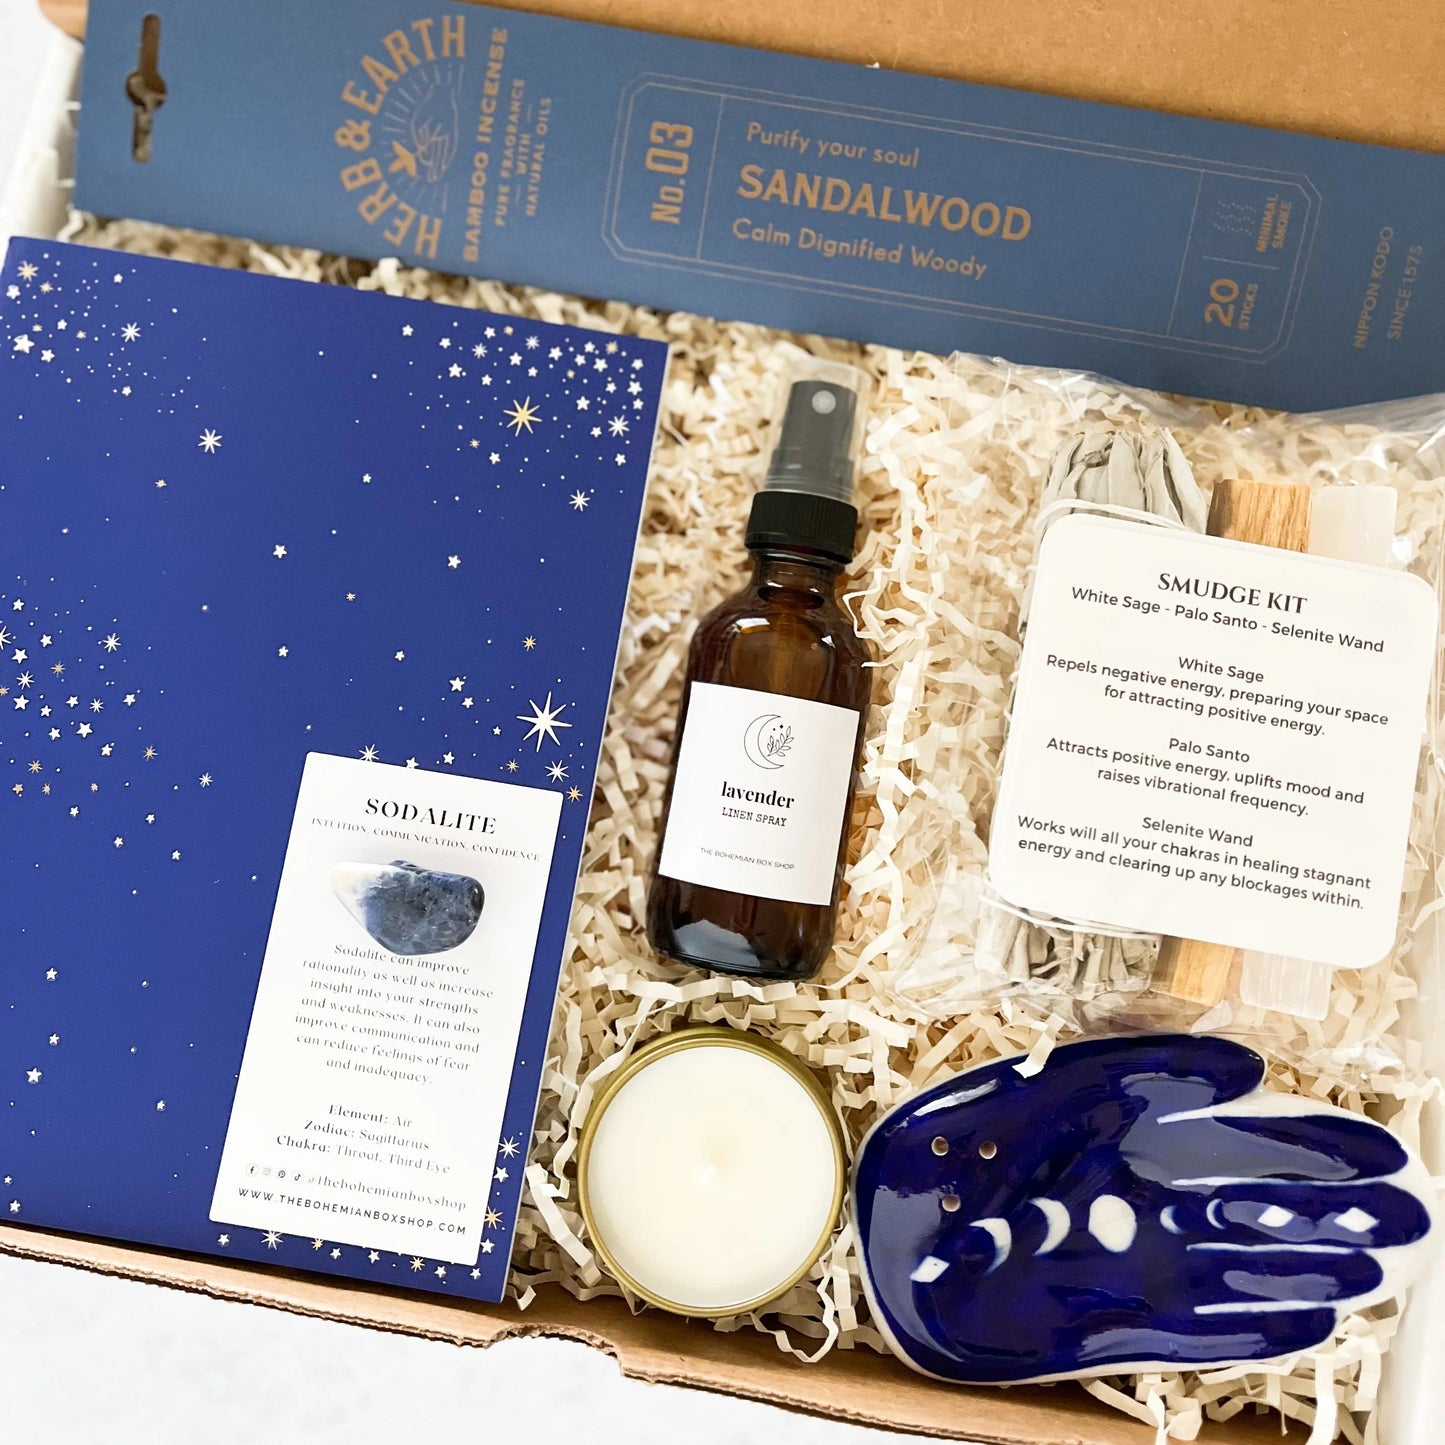 Celestial Spiritual Gift Set Box - Energy Cleansing Kit. Includes incense and hamsa holder, blue celestial journal, sodalite, lavender linen spray, soy candle, and smudge kit. 